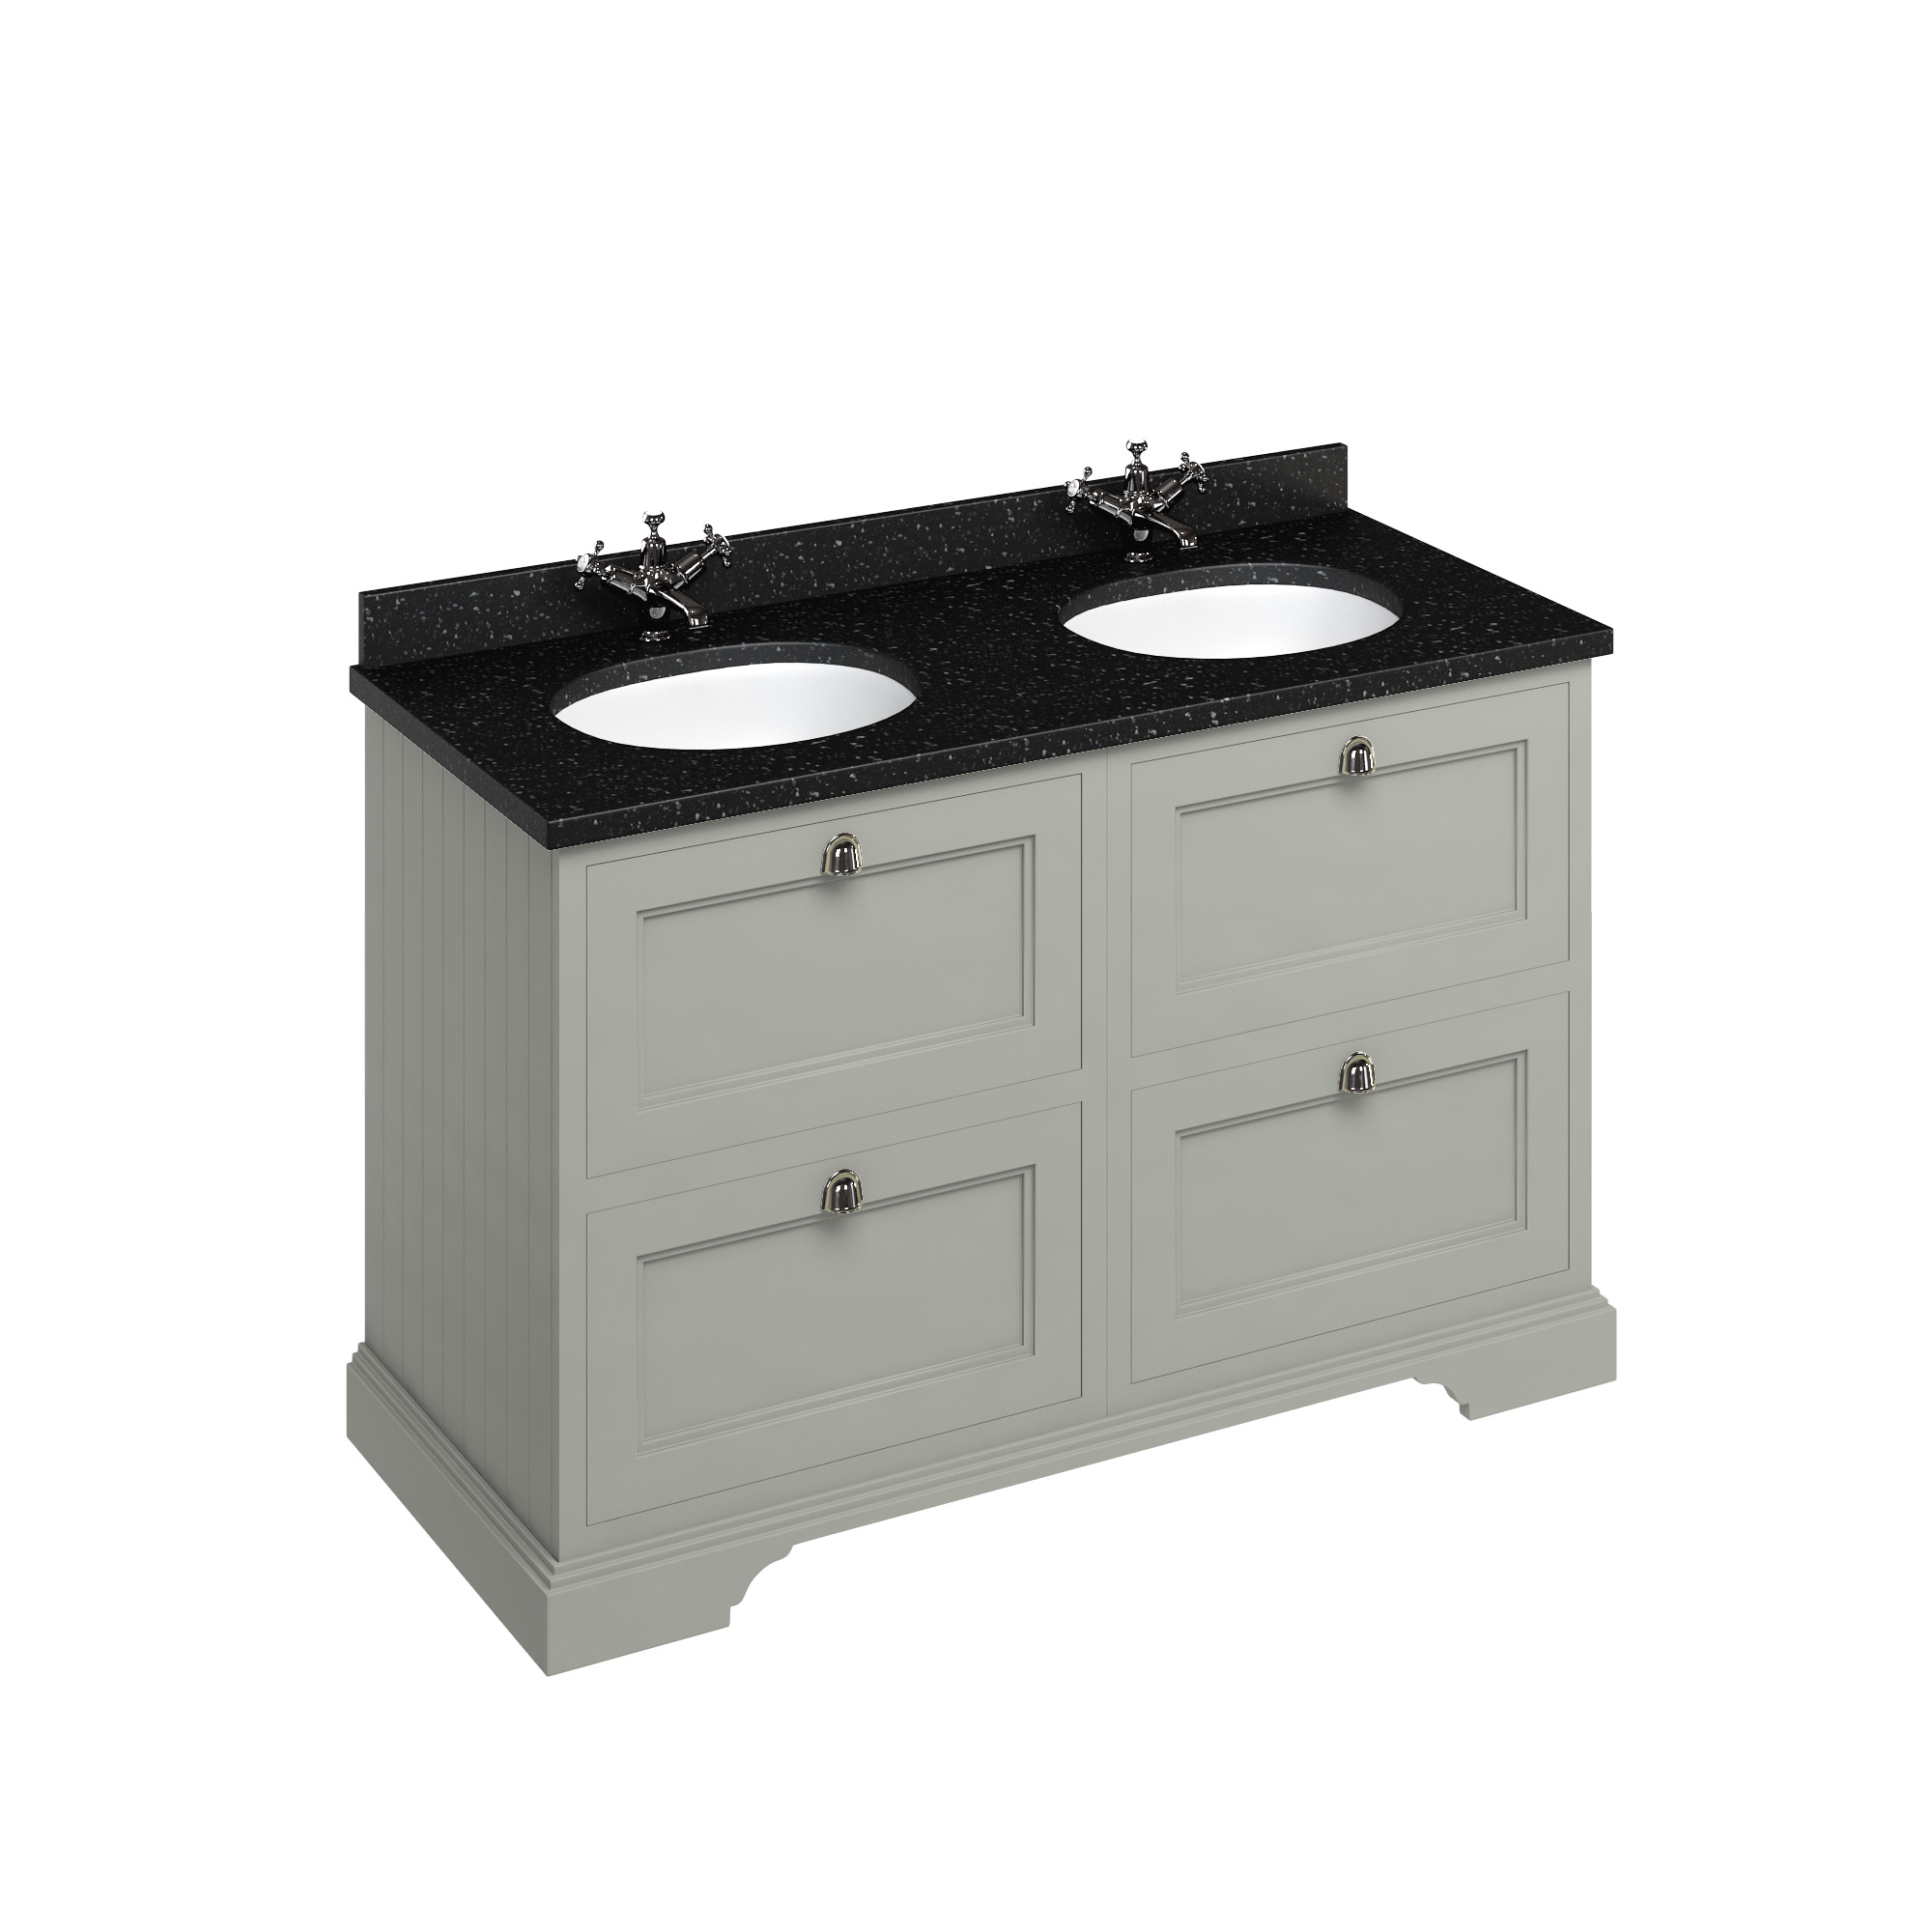 Freestanding 130 Vanity Unit with drawers - Dark Olive and Minerva black granite worktop with two integrated white basins